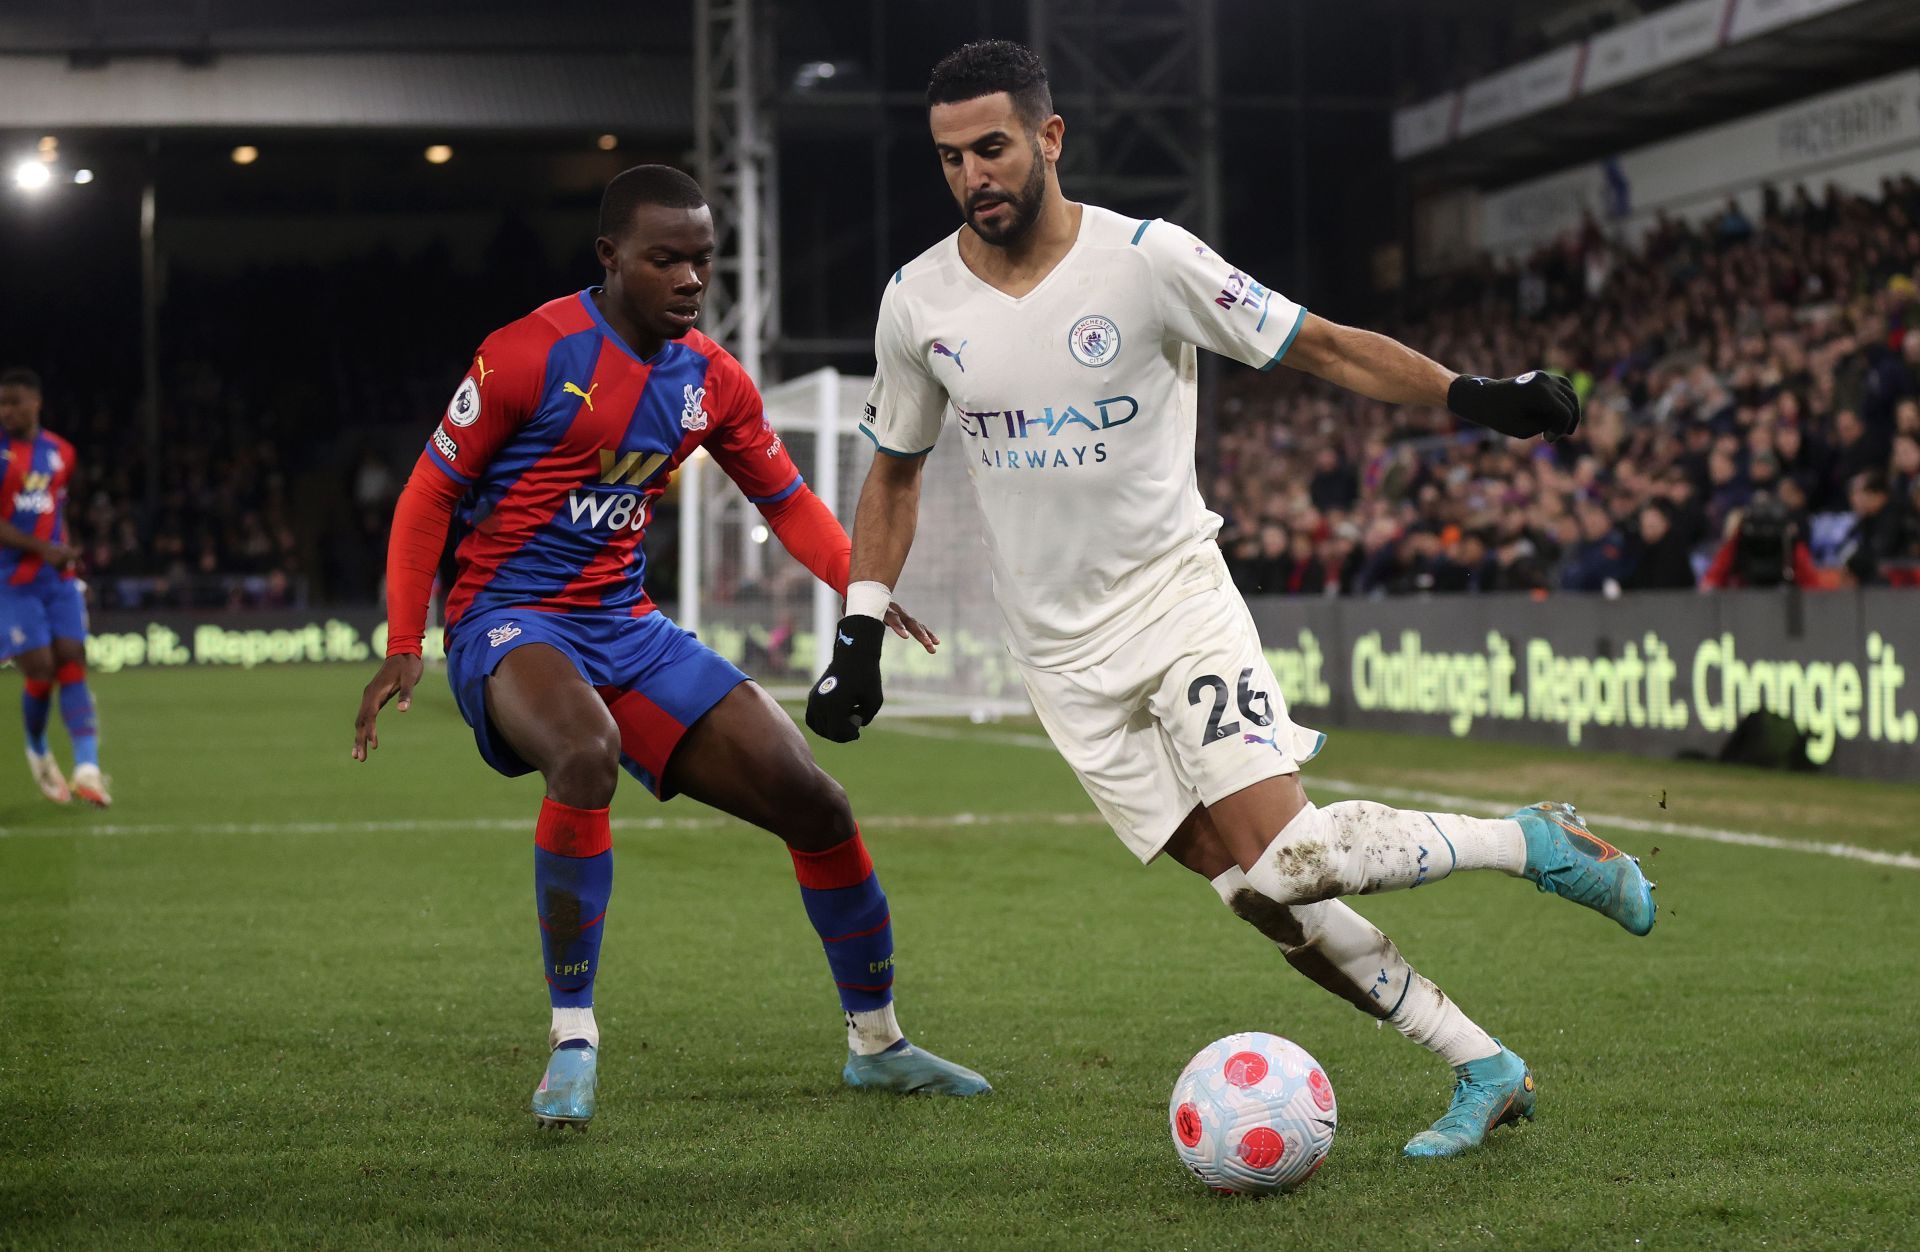 City played out a 0-0 stalemate at Selhurst Park